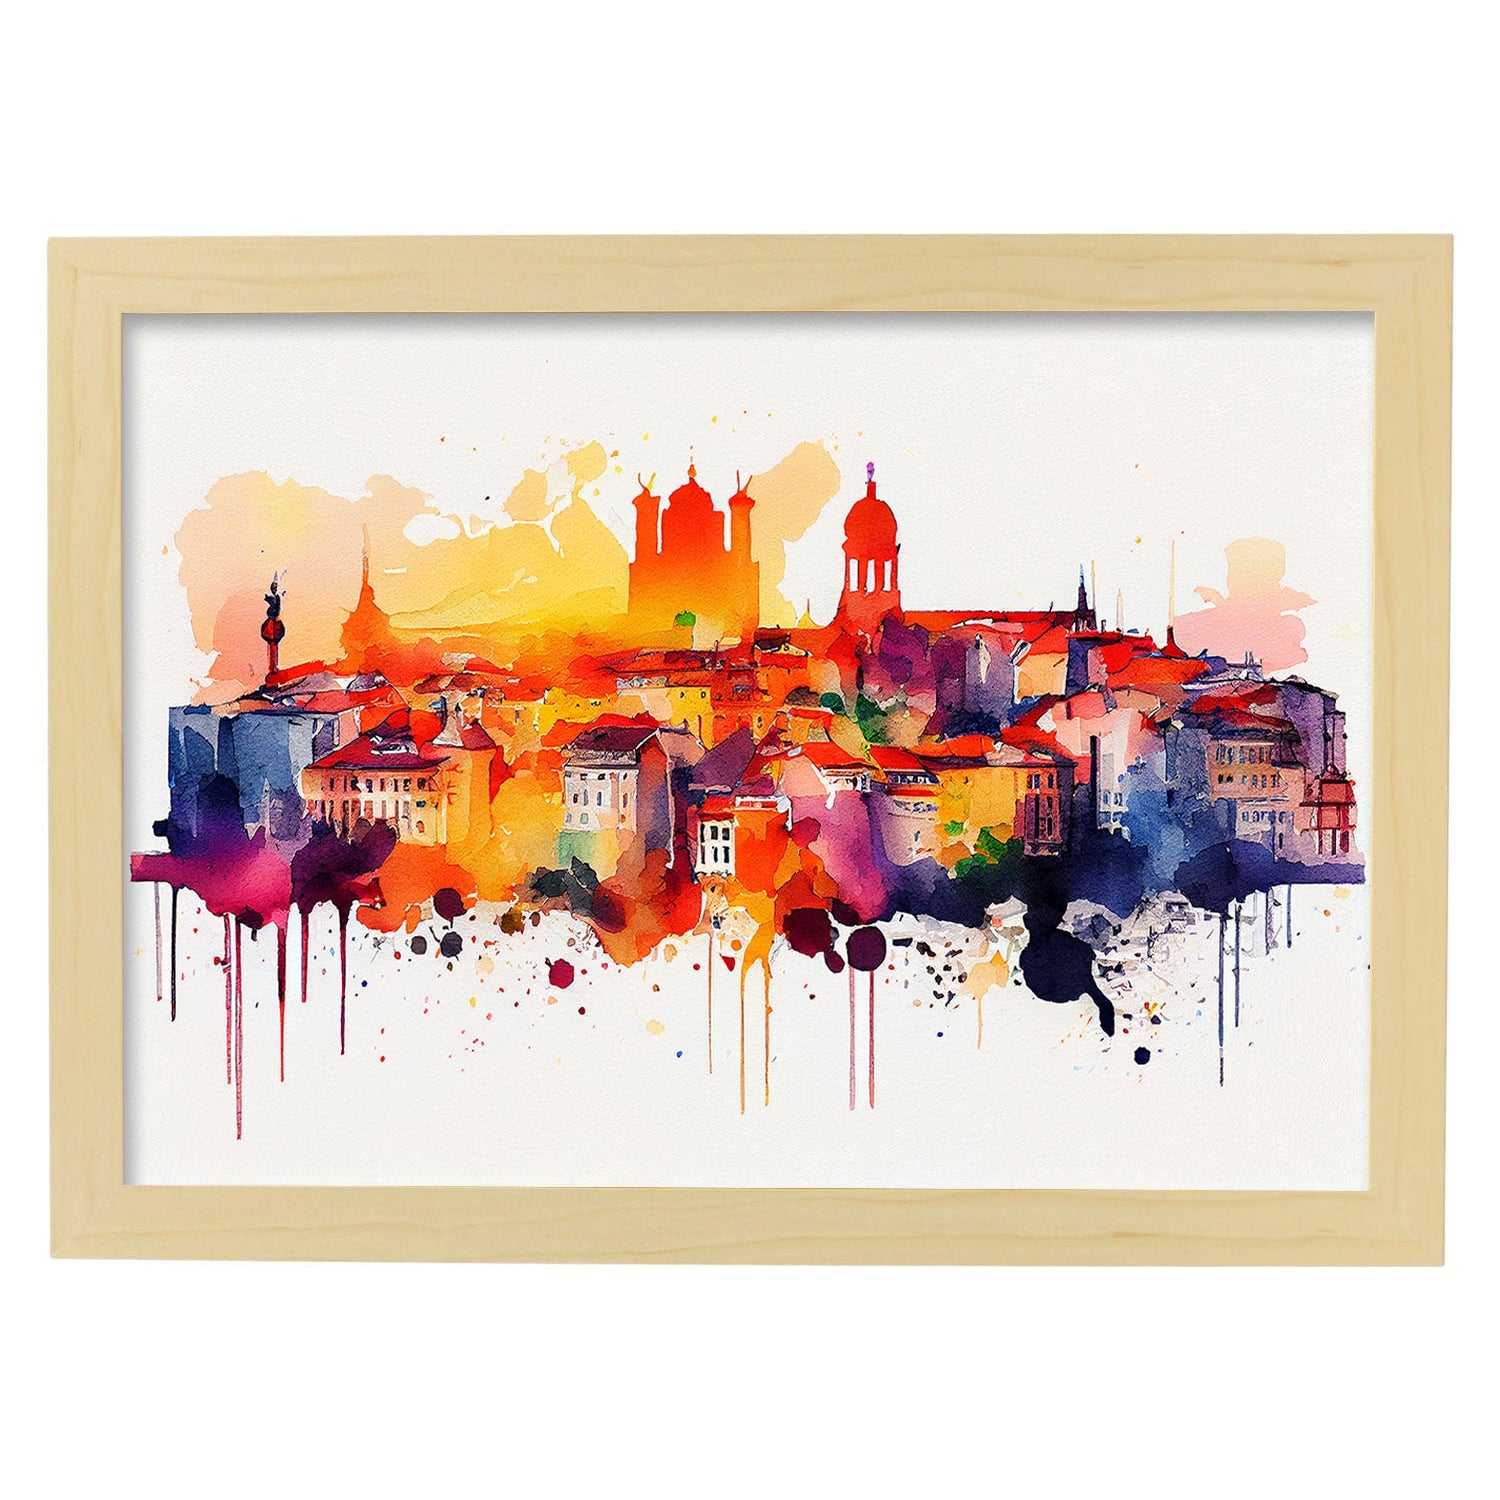 Nacnic watercolor of a skyline of the city of Lisbon_1. Aesthetic Wall Art Prints for Bedroom or Living Room Design.-Artwork-Nacnic-A4-Marco Madera Clara-Nacnic Estudio SL